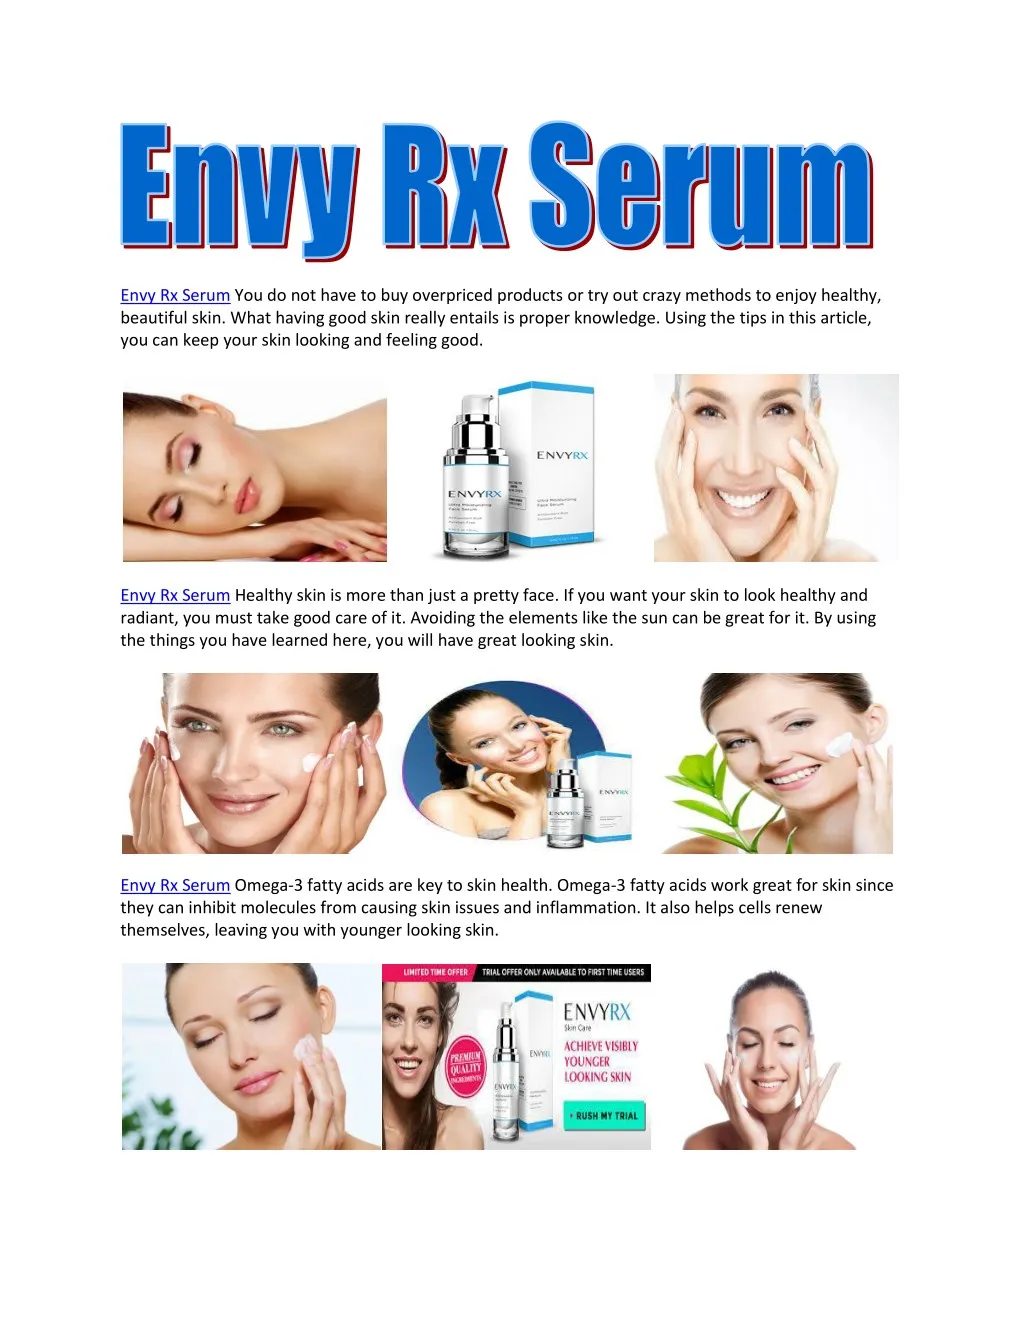 envy rx serum you do not have to buy overpriced